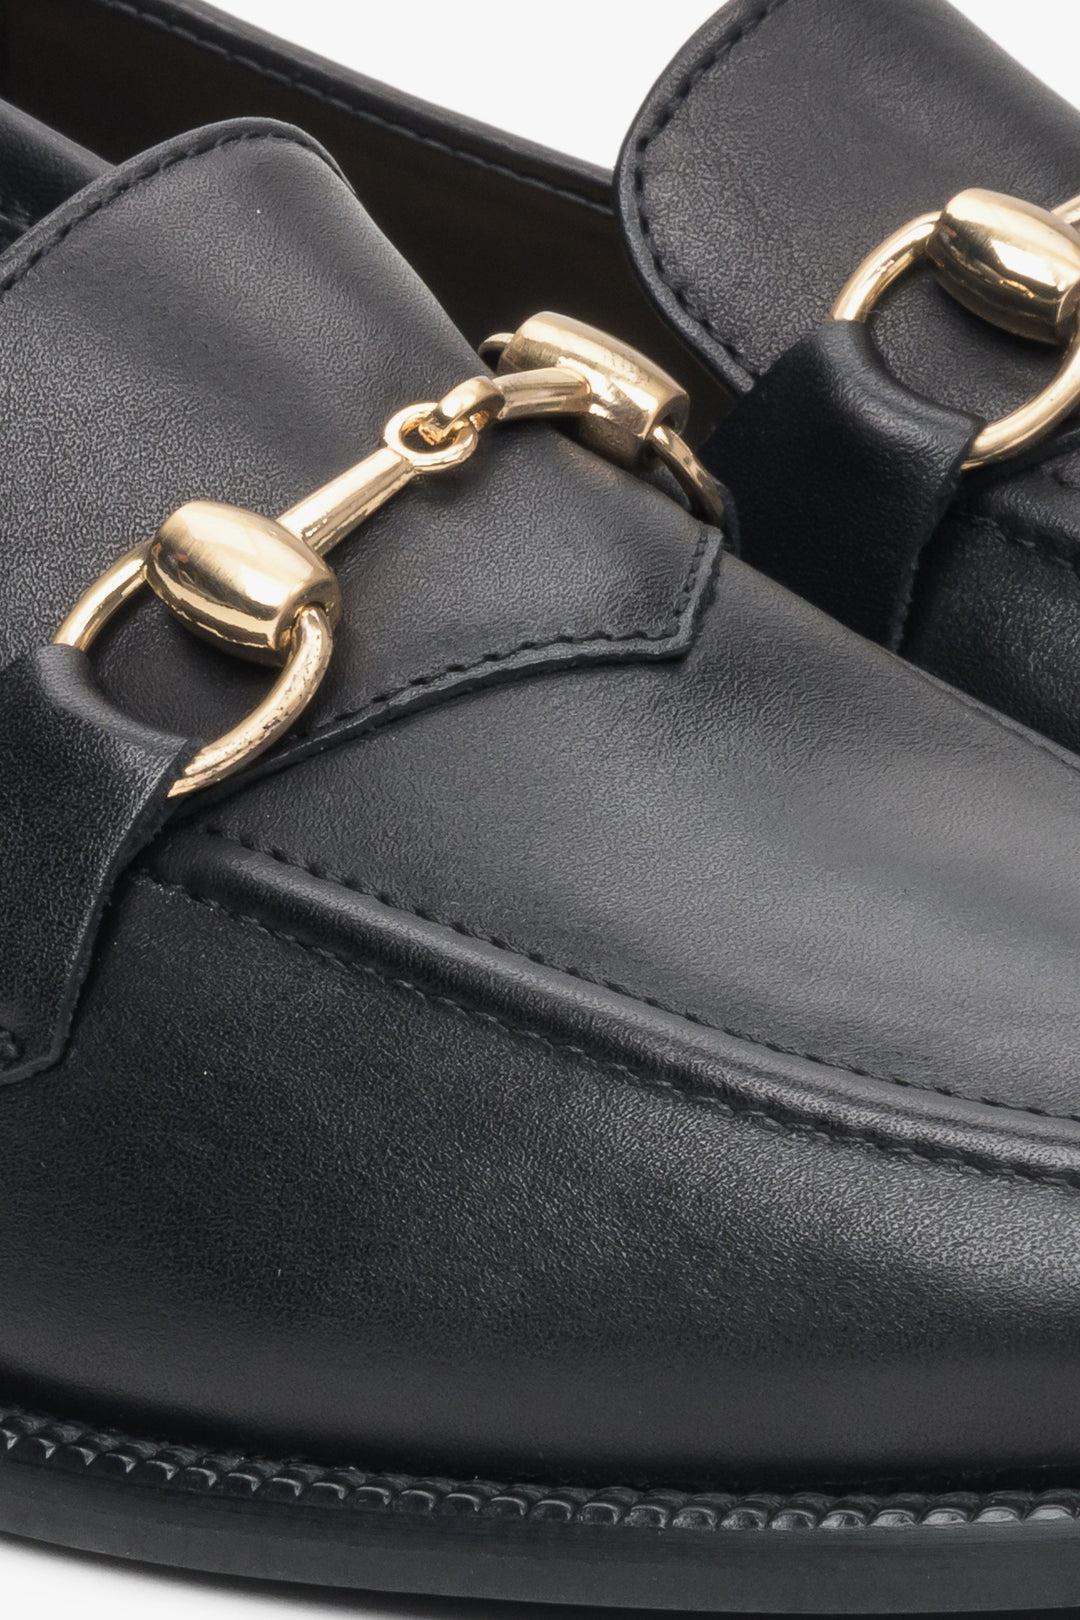 Elegant, black women's loafers made of Italian leather - close-up on details.